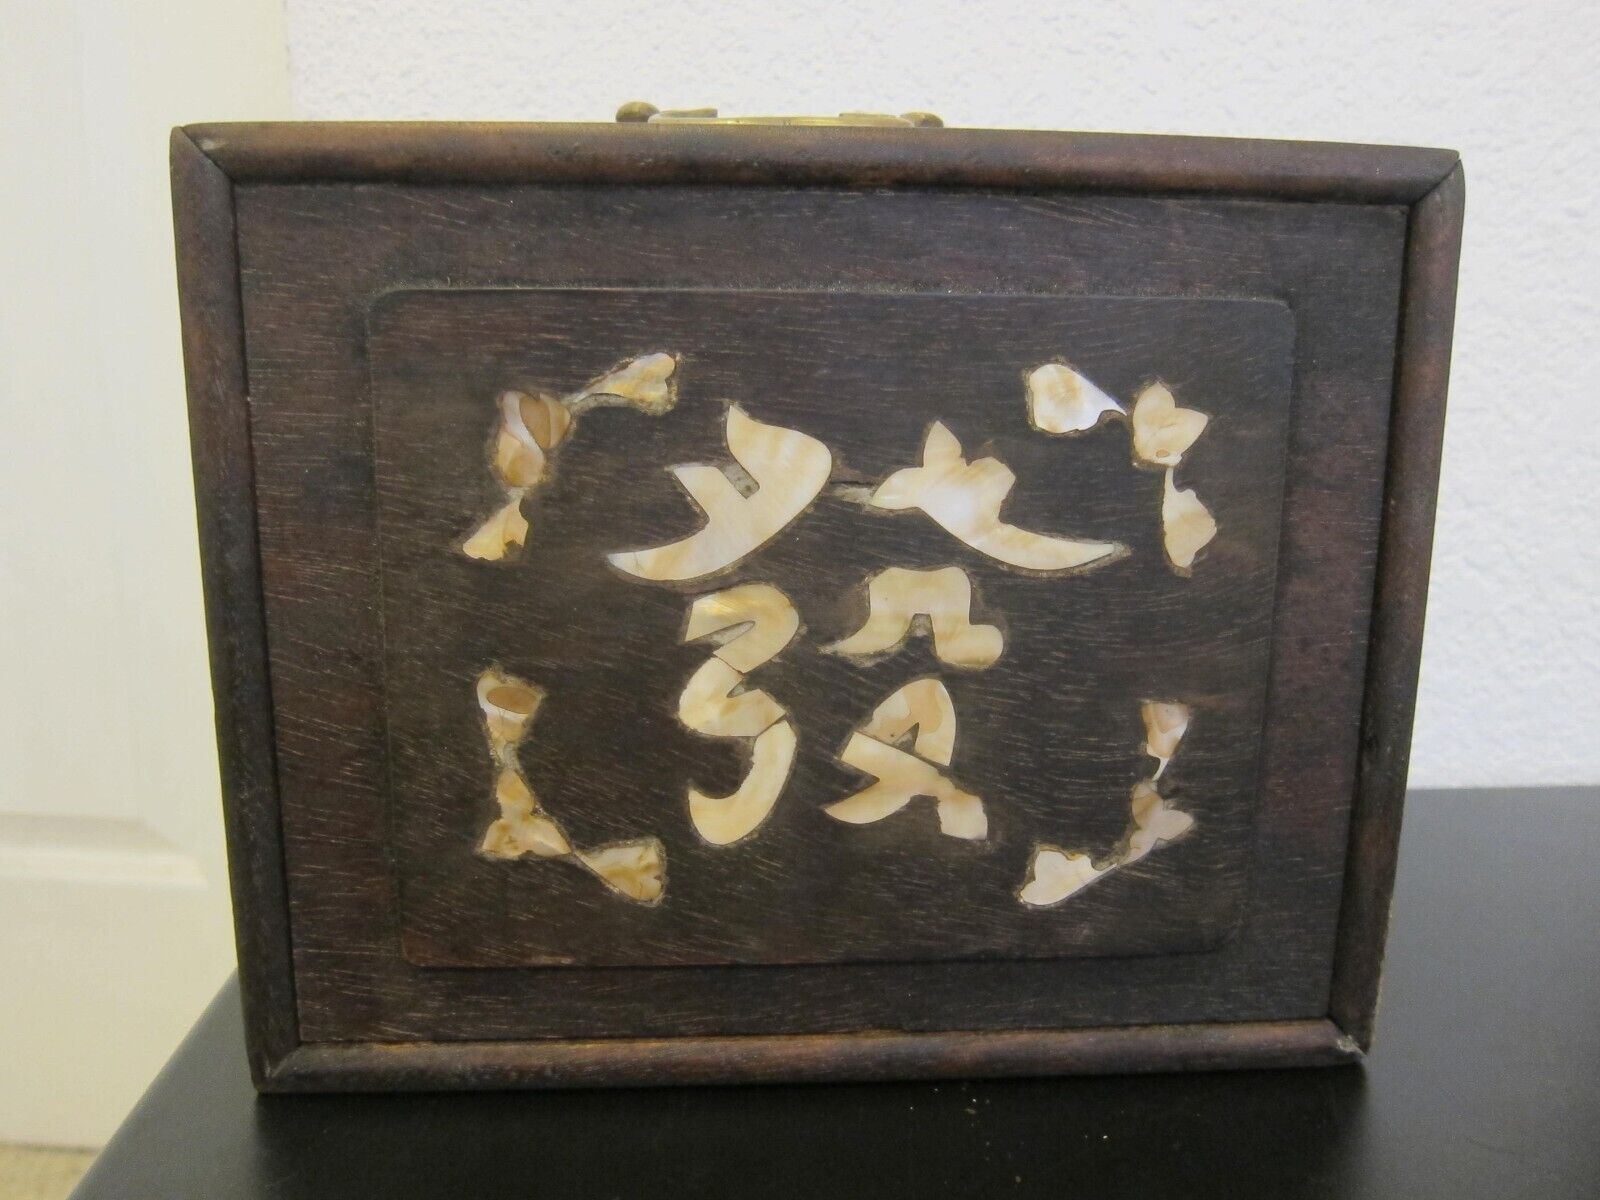 Vintage Chinese Asian wooden jewelry storage box with mother of pearl accents